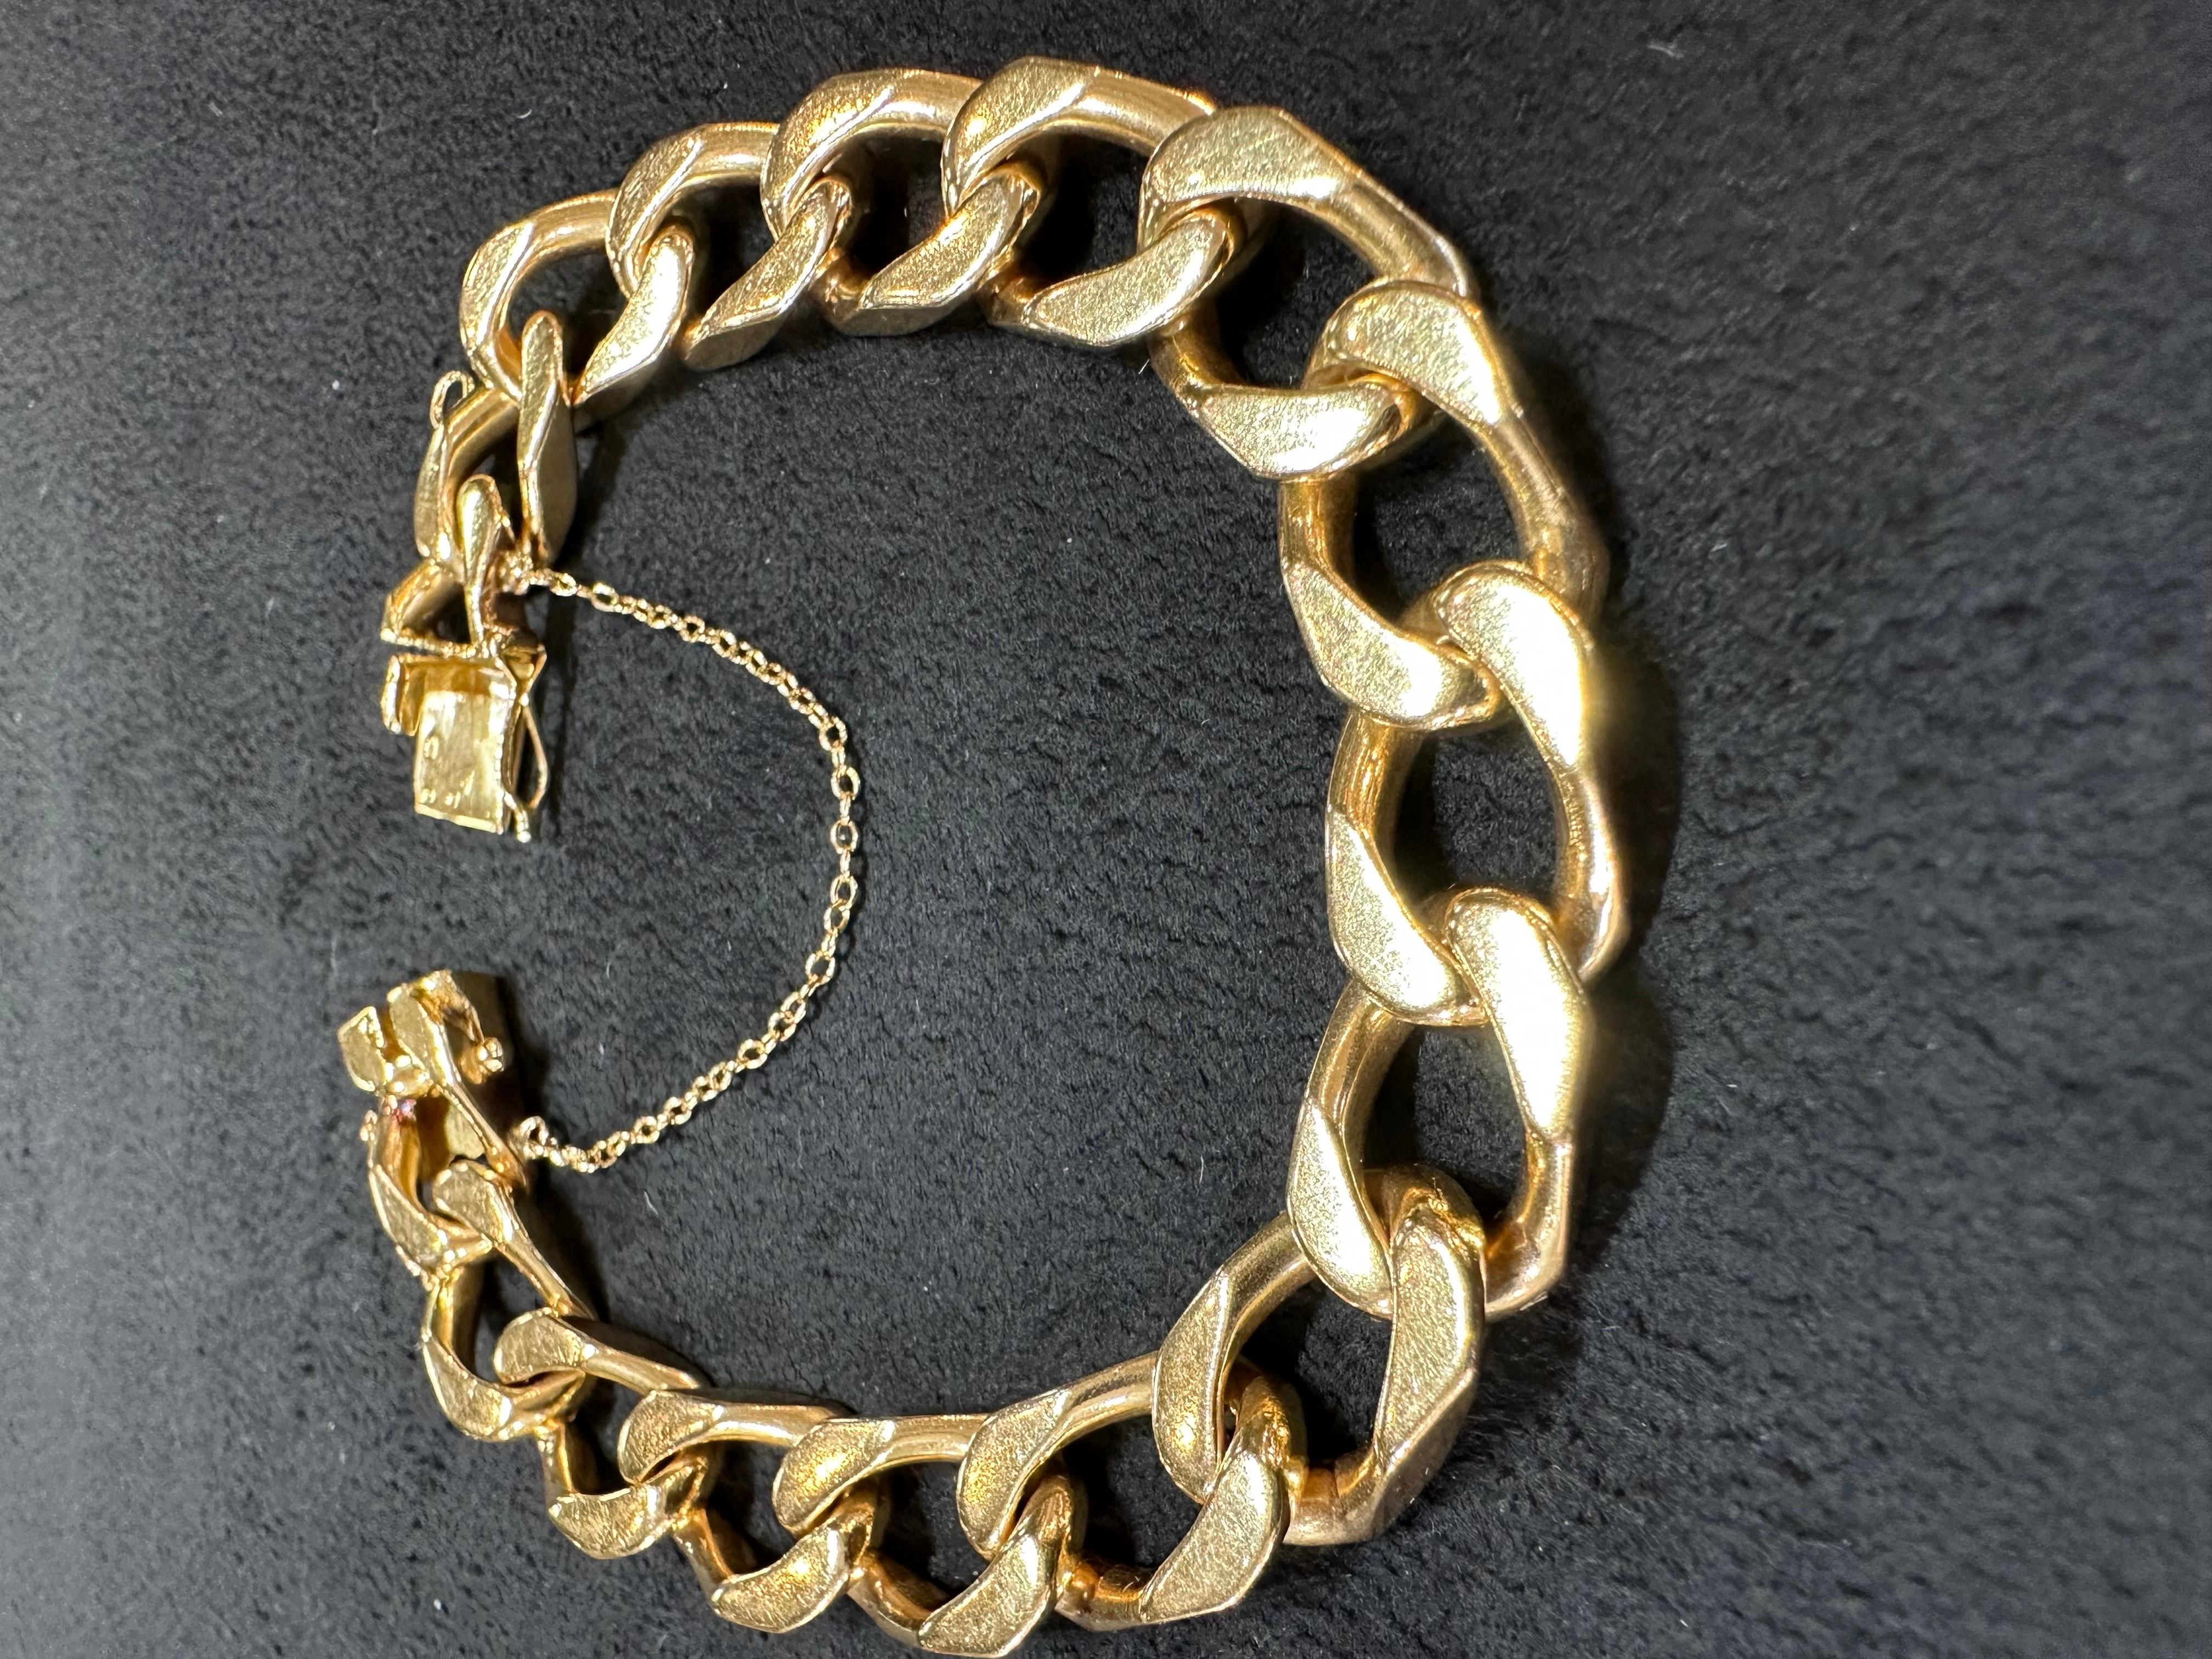 An 18 karat yellow gold gourmet mesh cuff representing the 1960s. This piece of jewellery weighs 68.50 grams and is made up of large solid gold links that are 1 centimetre wide and 2 centimetres long. The total length of the cuff is 20 centimetres,